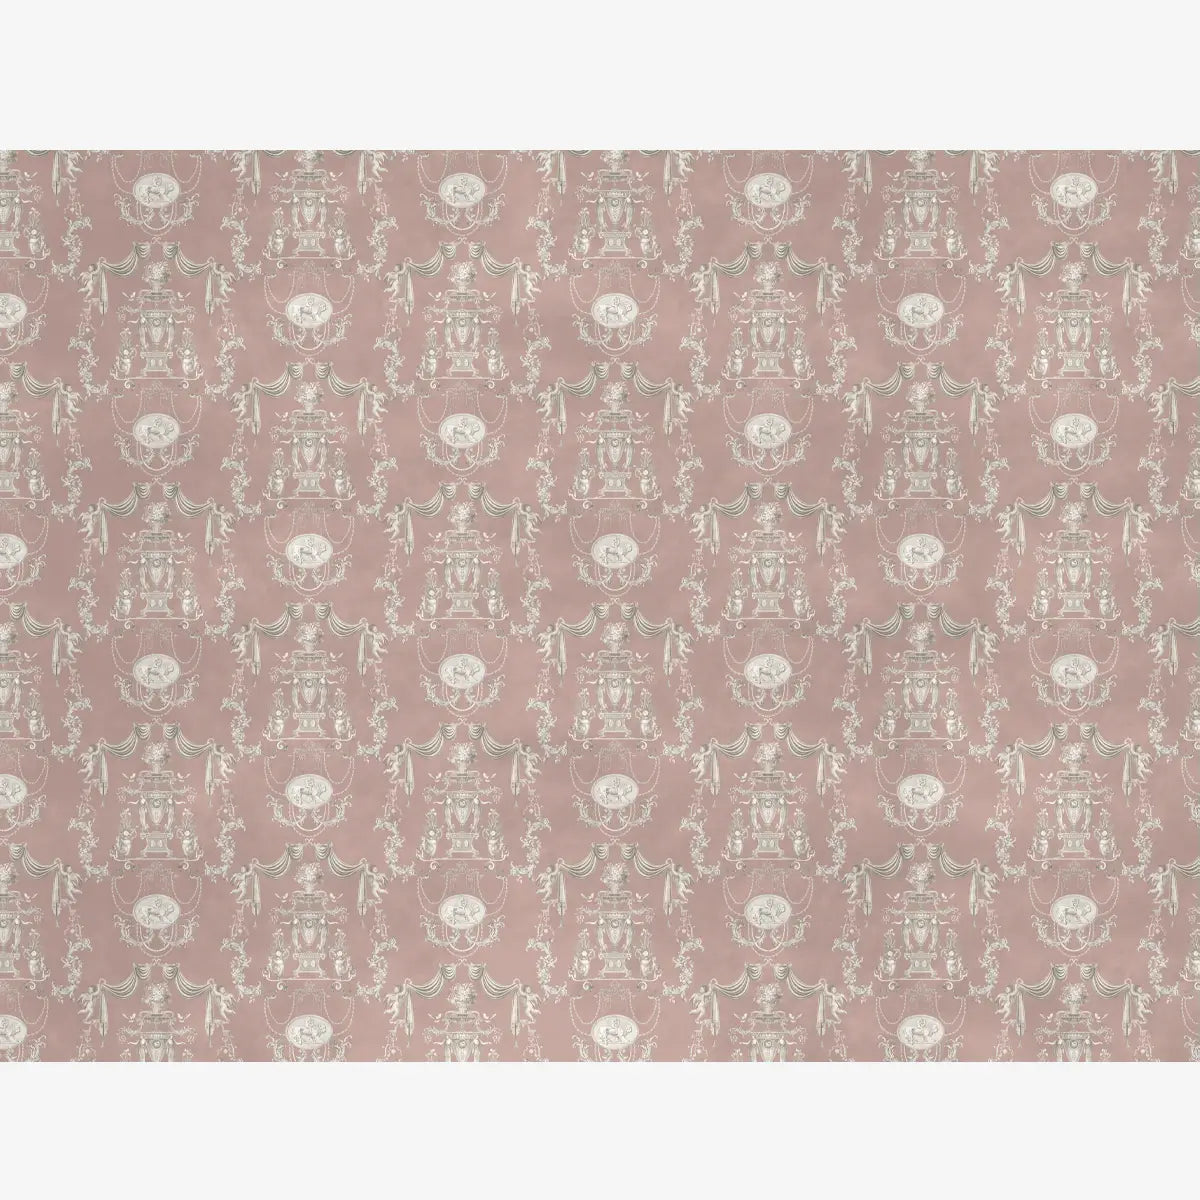 European Tapestry Beautiful Repeat pattern Made for Walls Buy Now 